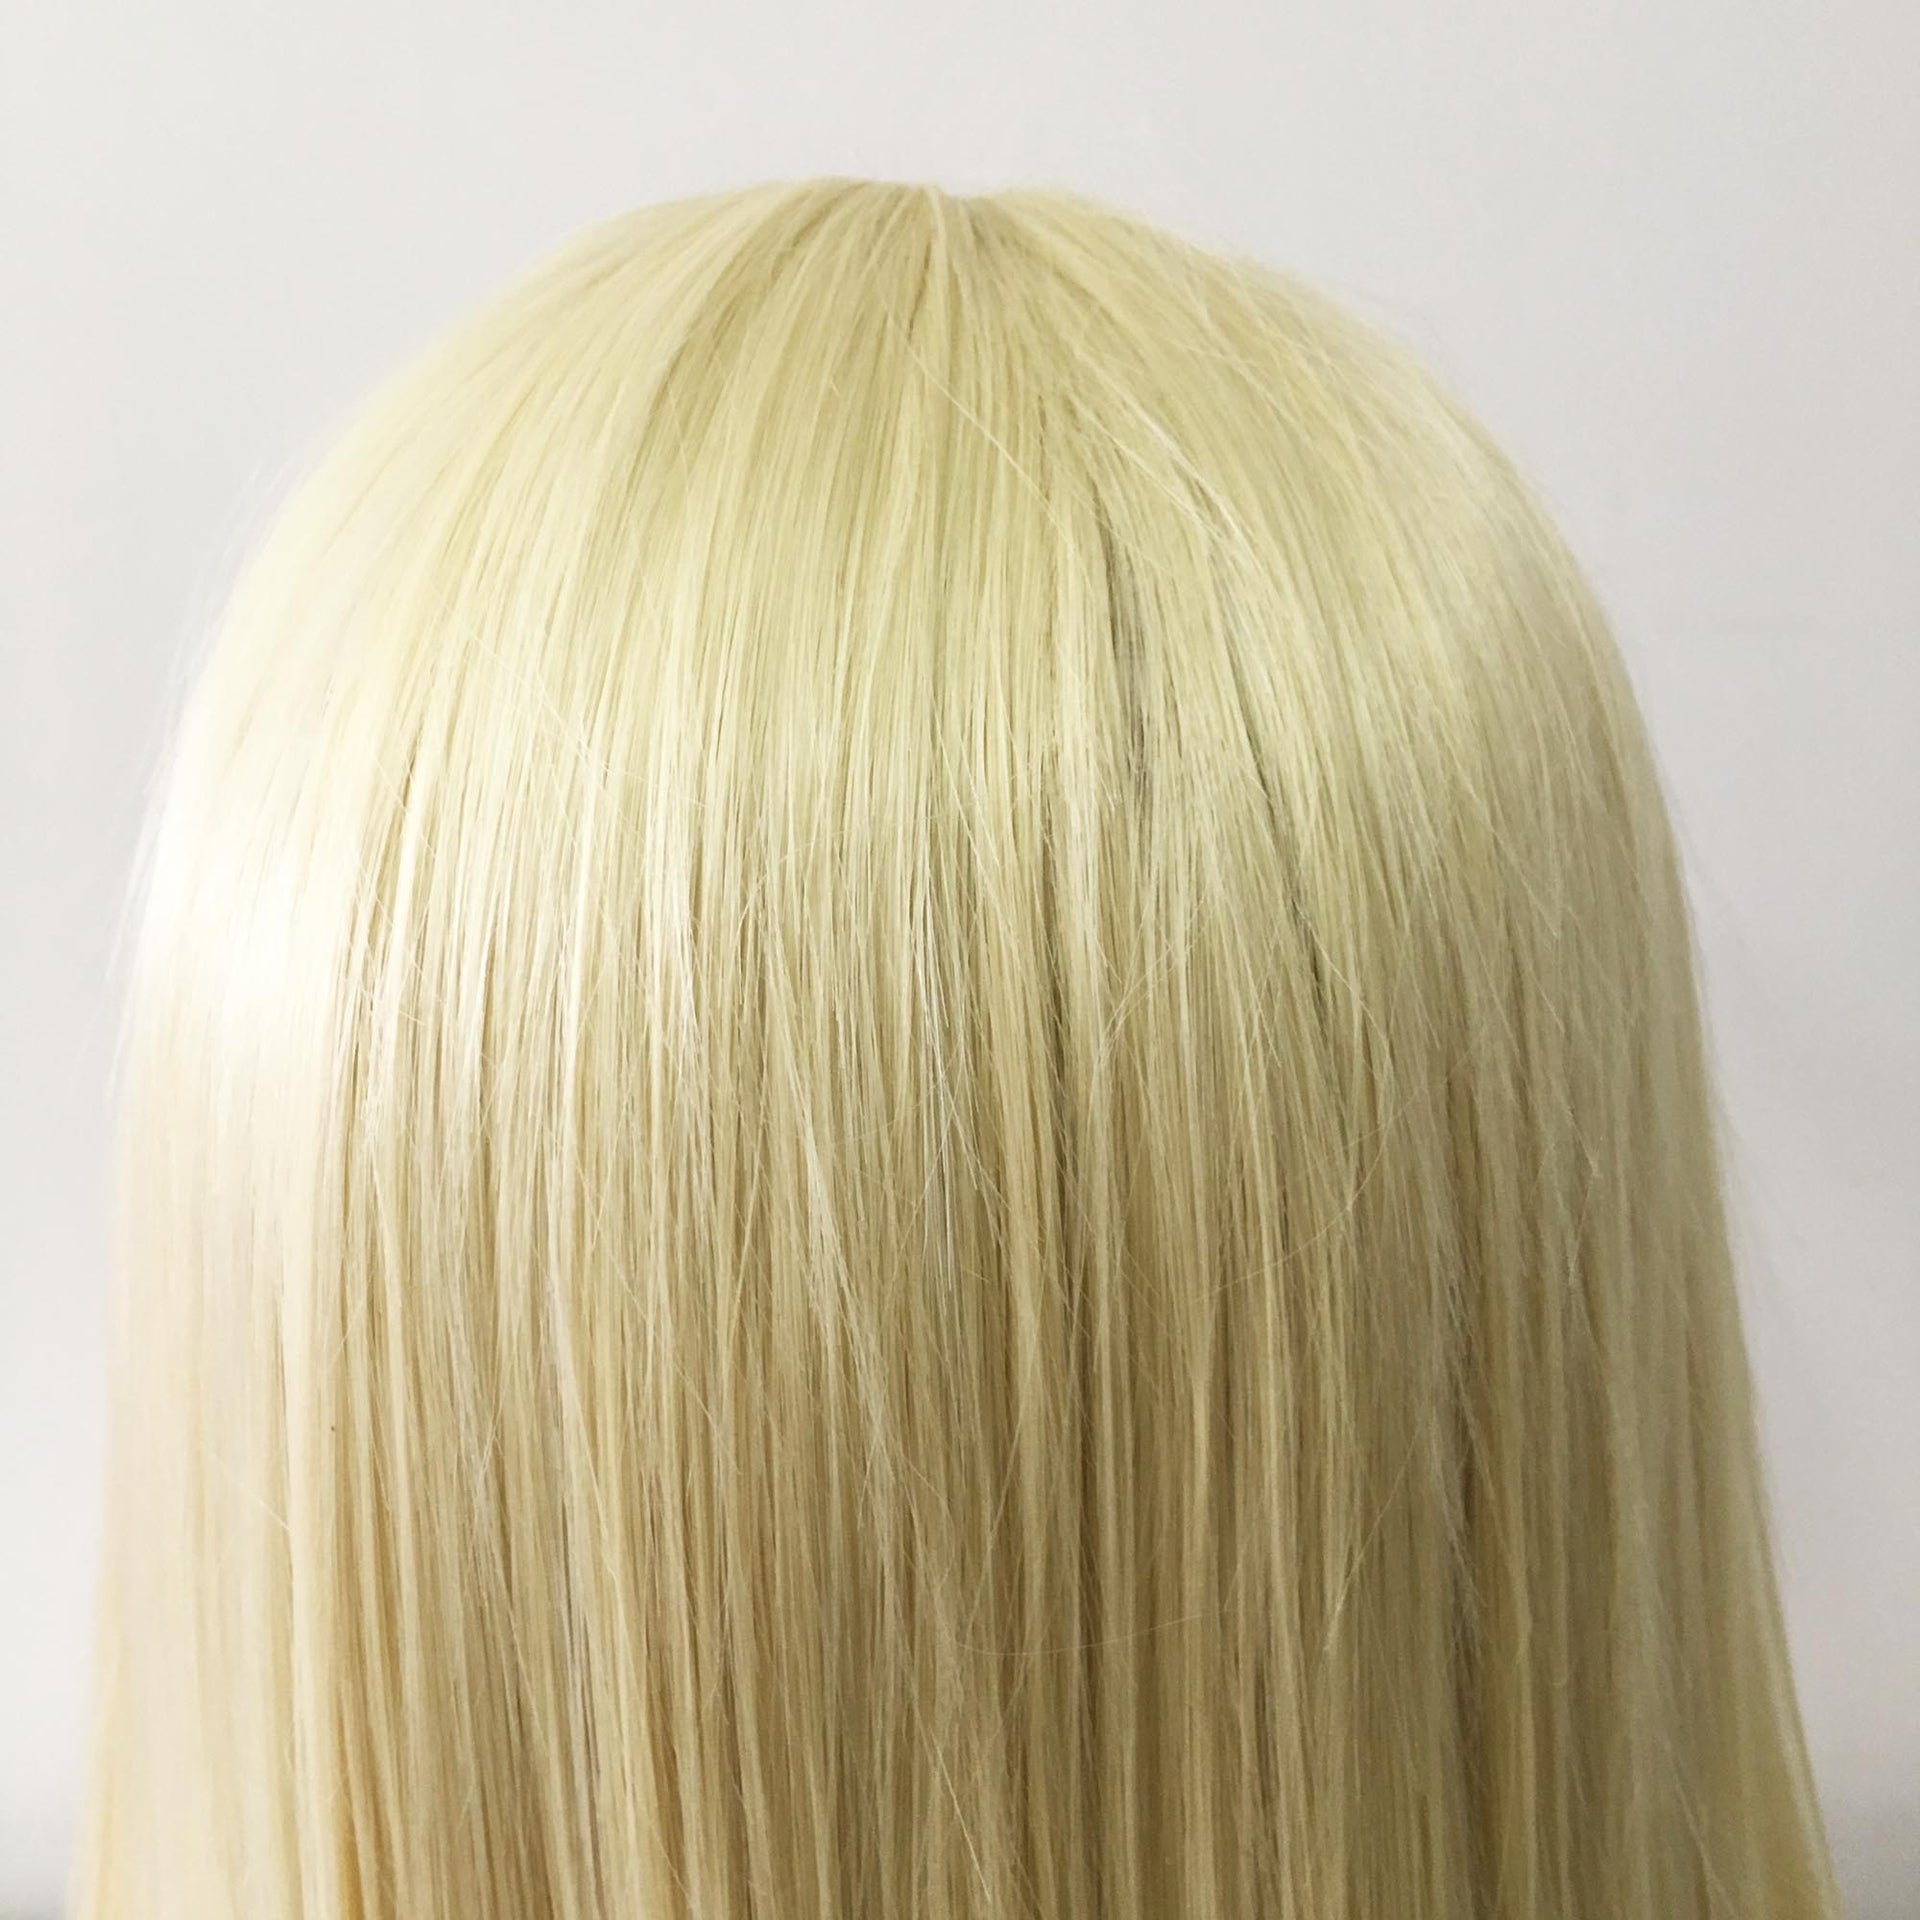 nevermindyrhead Women Lace Front Light Blonde Middle Part Long Soft Straight Hair Wig